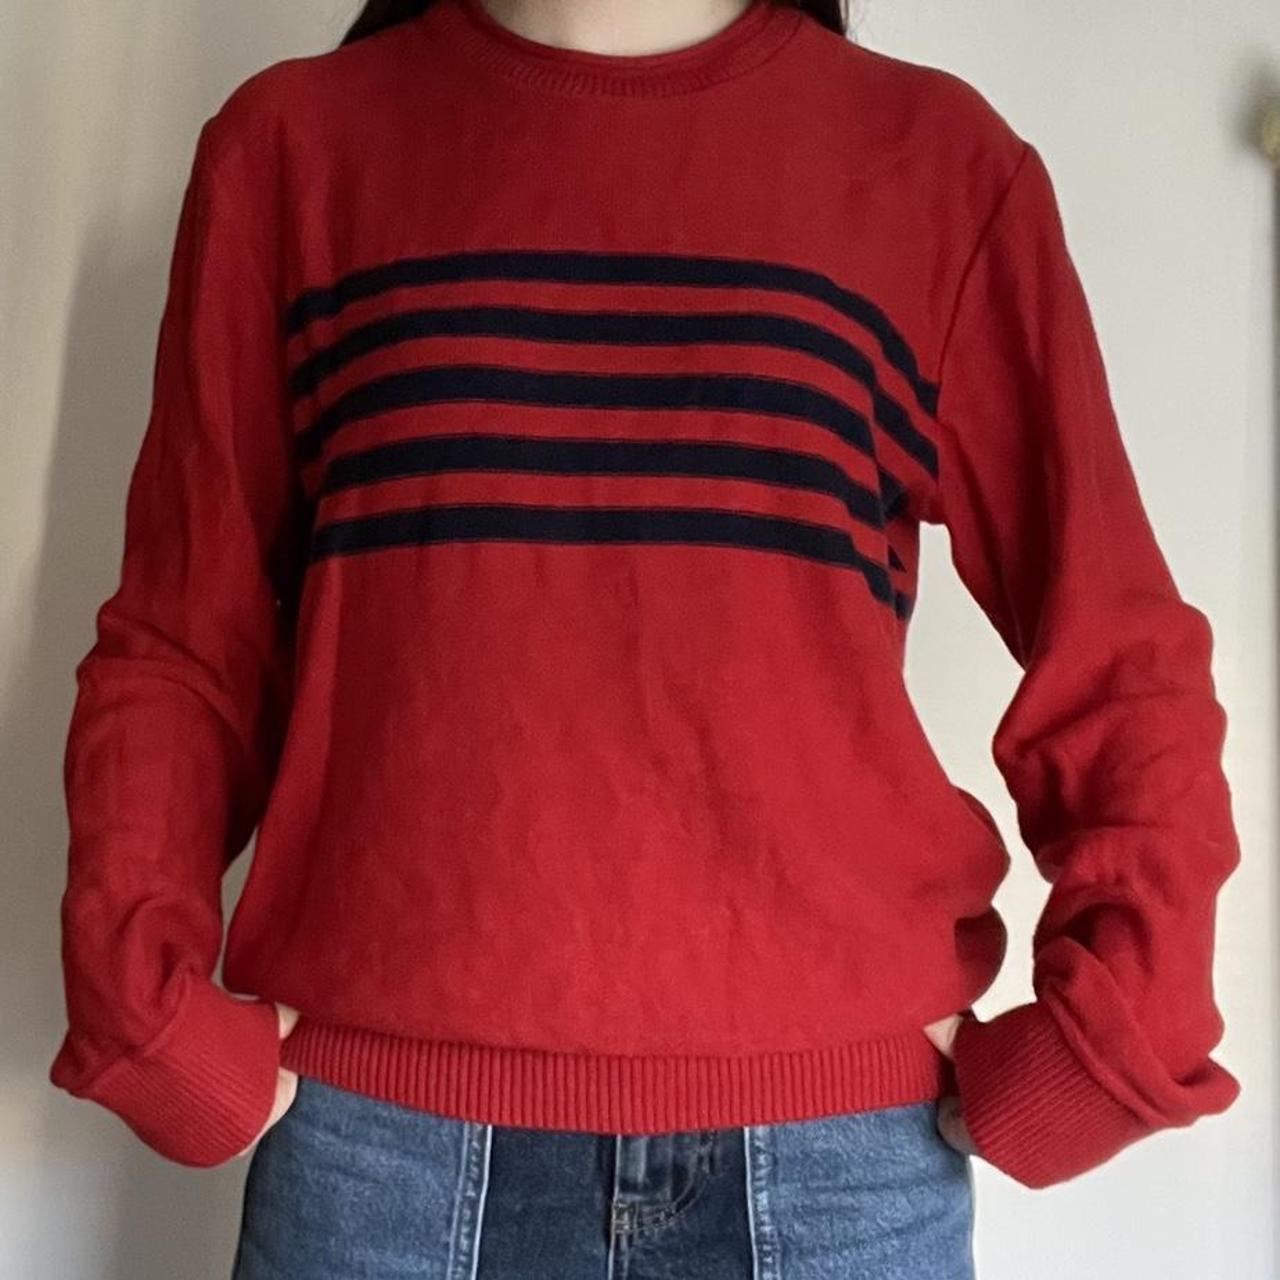 gap knitted red and navy jumper in size small or... - Depop